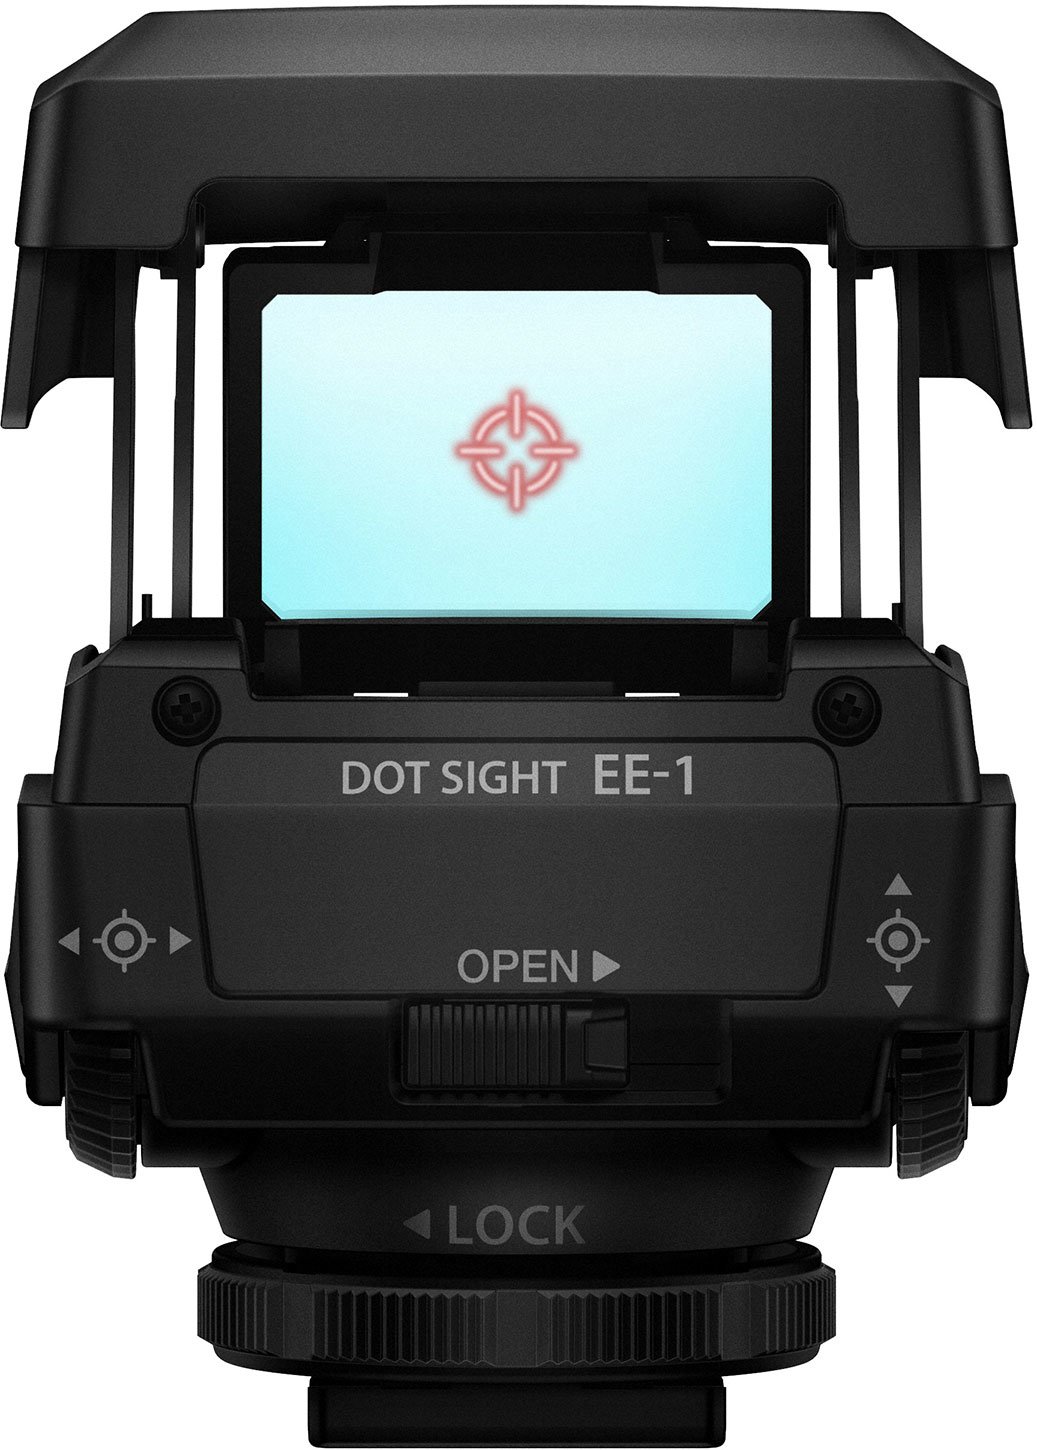 Olympus EE-1 Dot Sight - The Photo Center